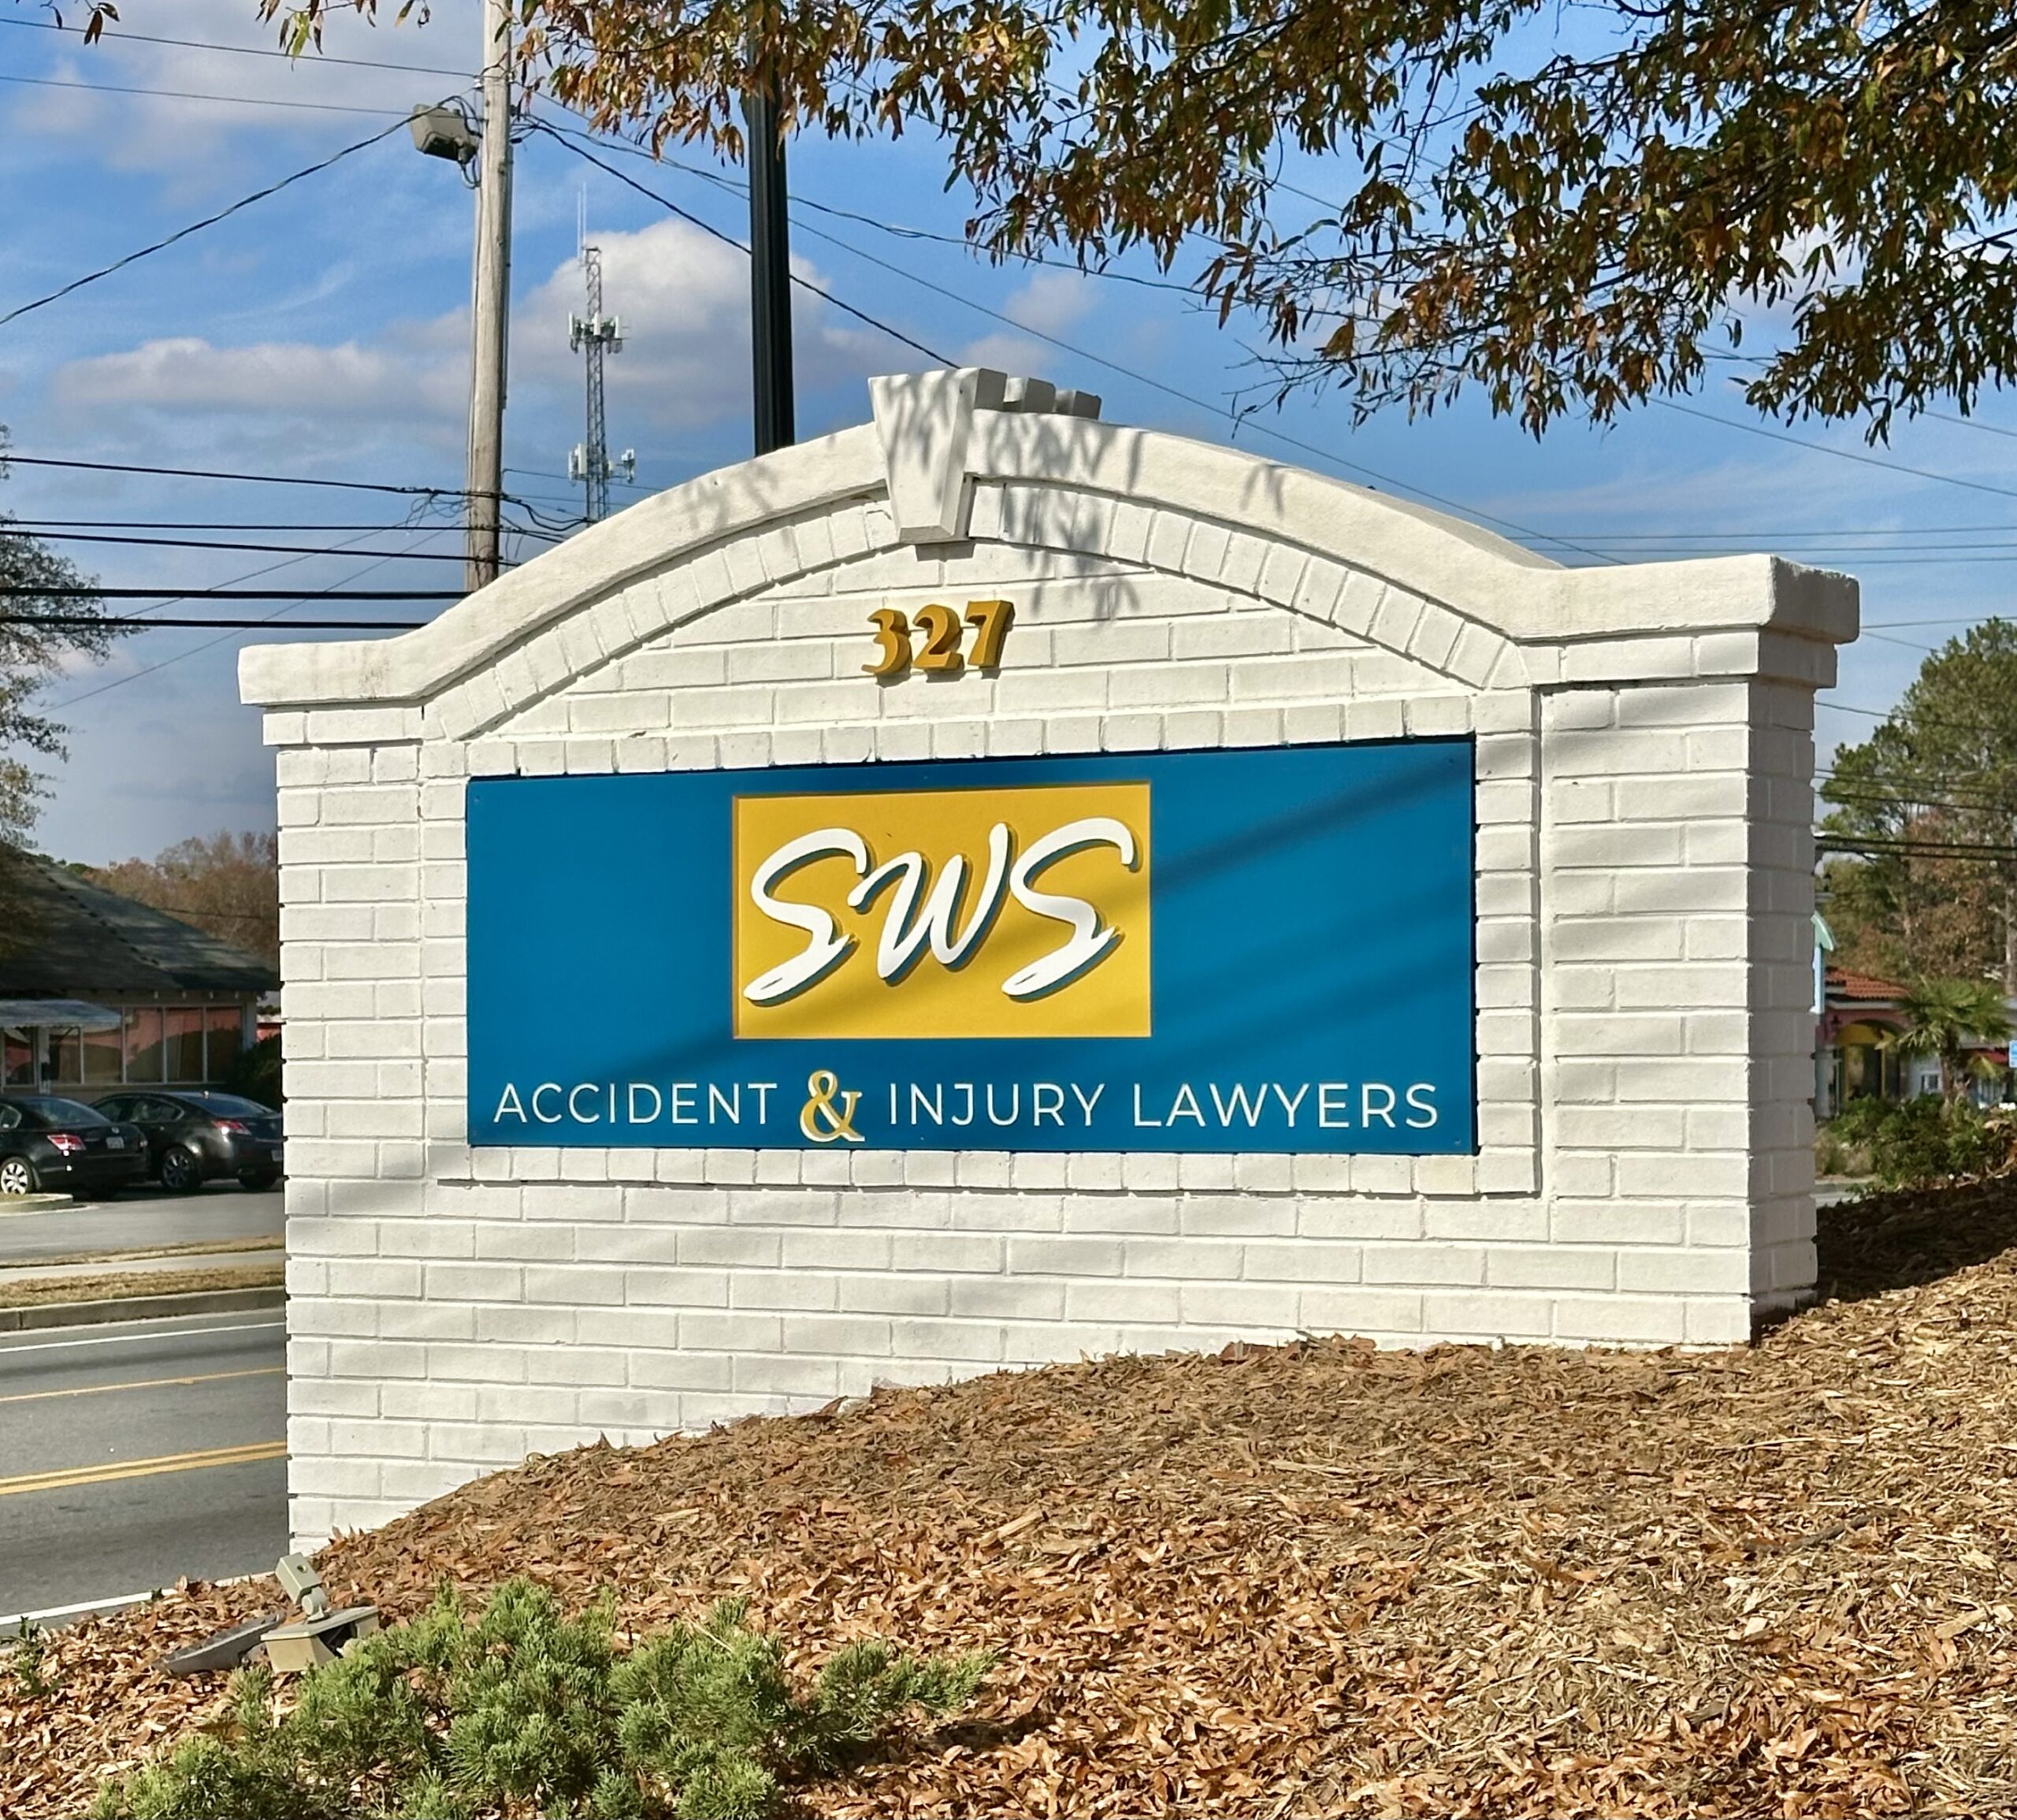 SWS Smith Wallis & Scott - Accident and Injury Lawyers Sign